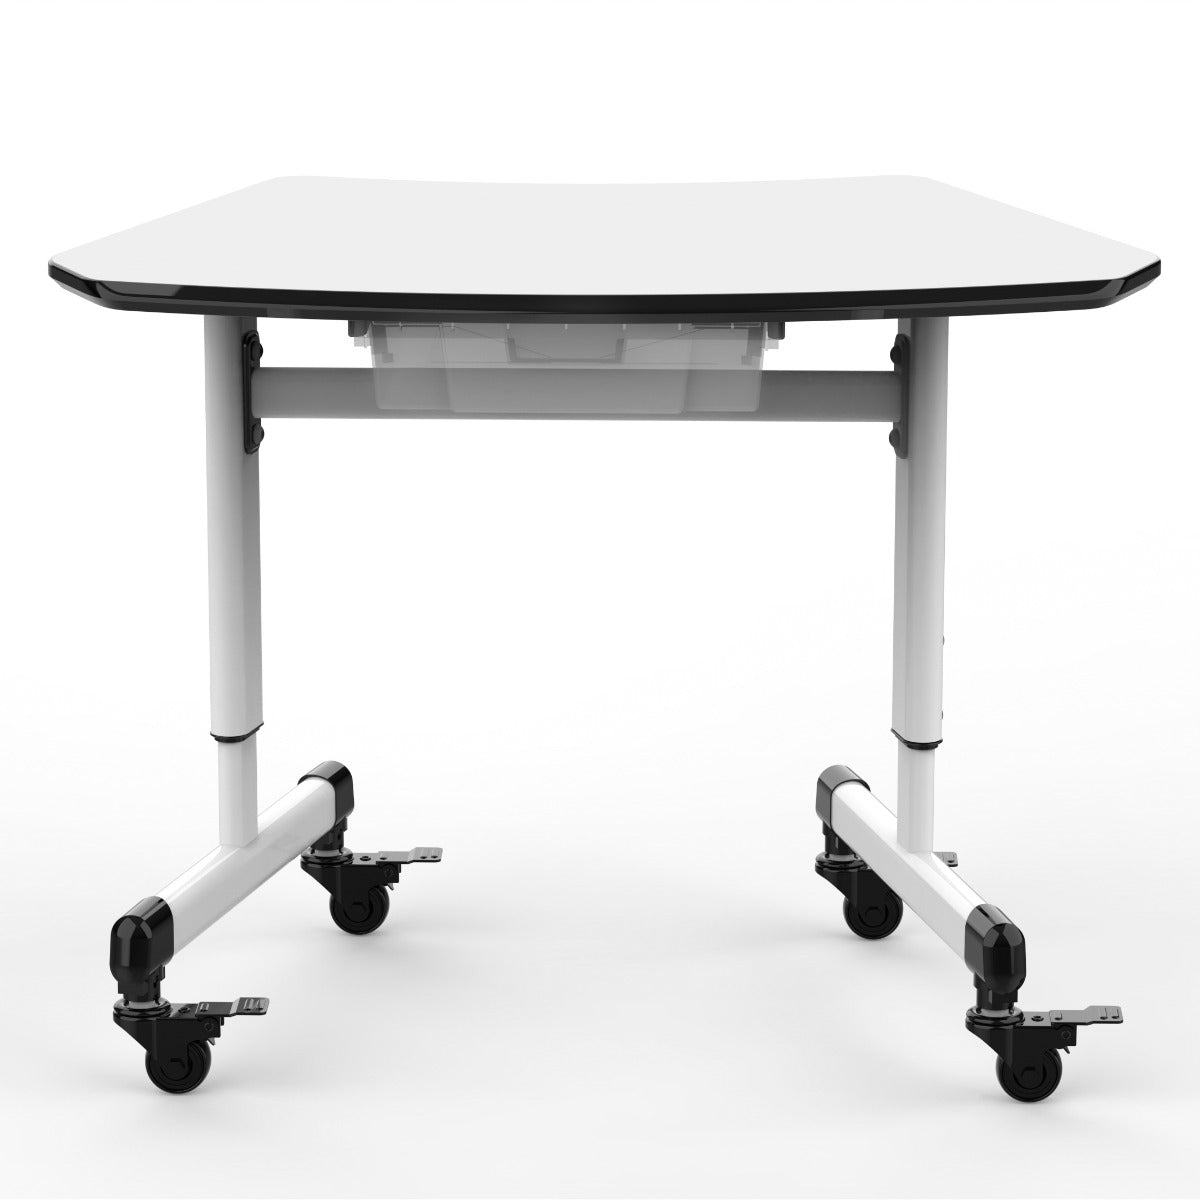 Luxor MBS-DESK - Height-Adjustable Trapezoid Student Desk with Drawer 29" W x 19" D x 29.75" H (LUX-MBS-DESK) - SchoolOutlet